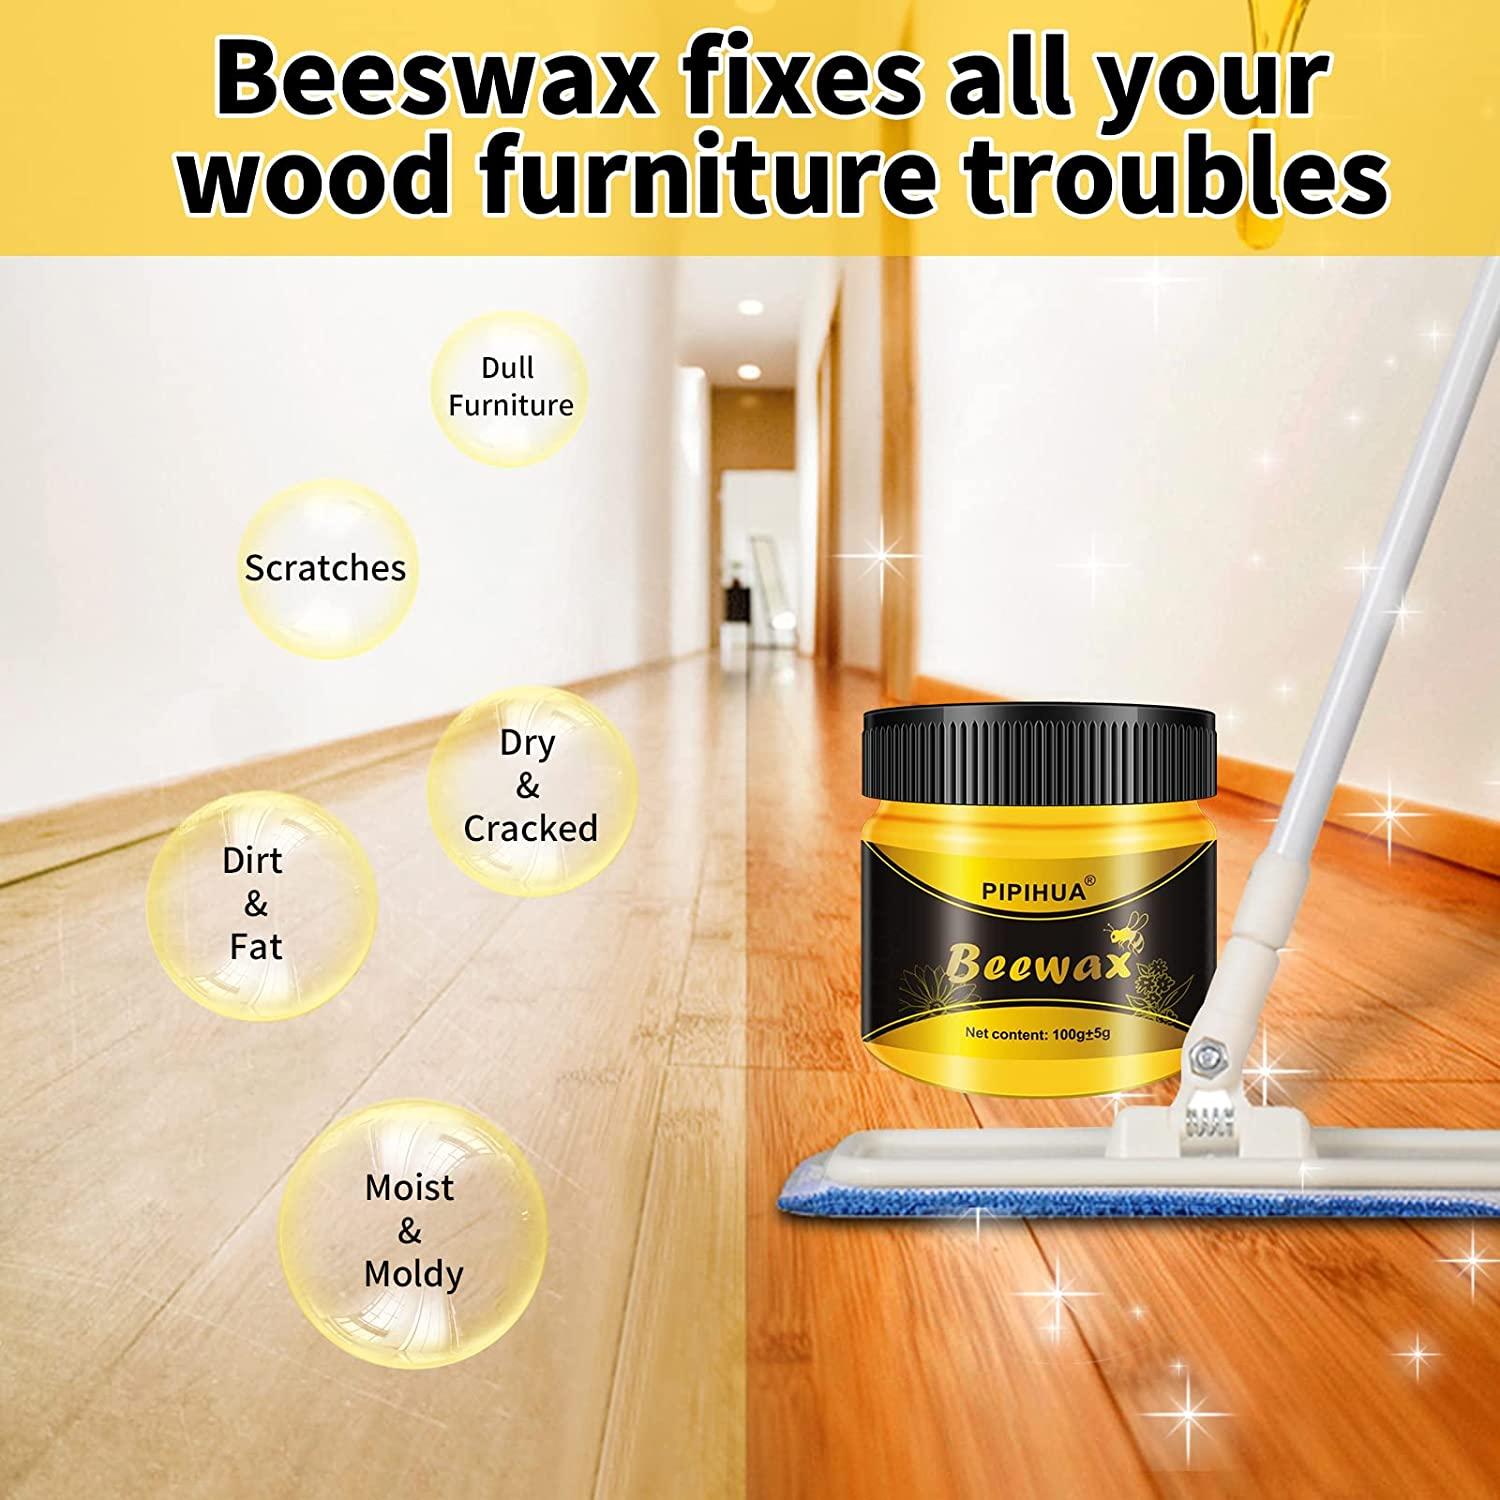 PIPIHUA Beeswax Furniture Polish, Wood Seasoning Beeswax for Furniture  Waterproof & Repair Wood Wax for Floors Cabinets to Protect & Care, 2pcs  Beeswax Polish with 4pcs Sponges